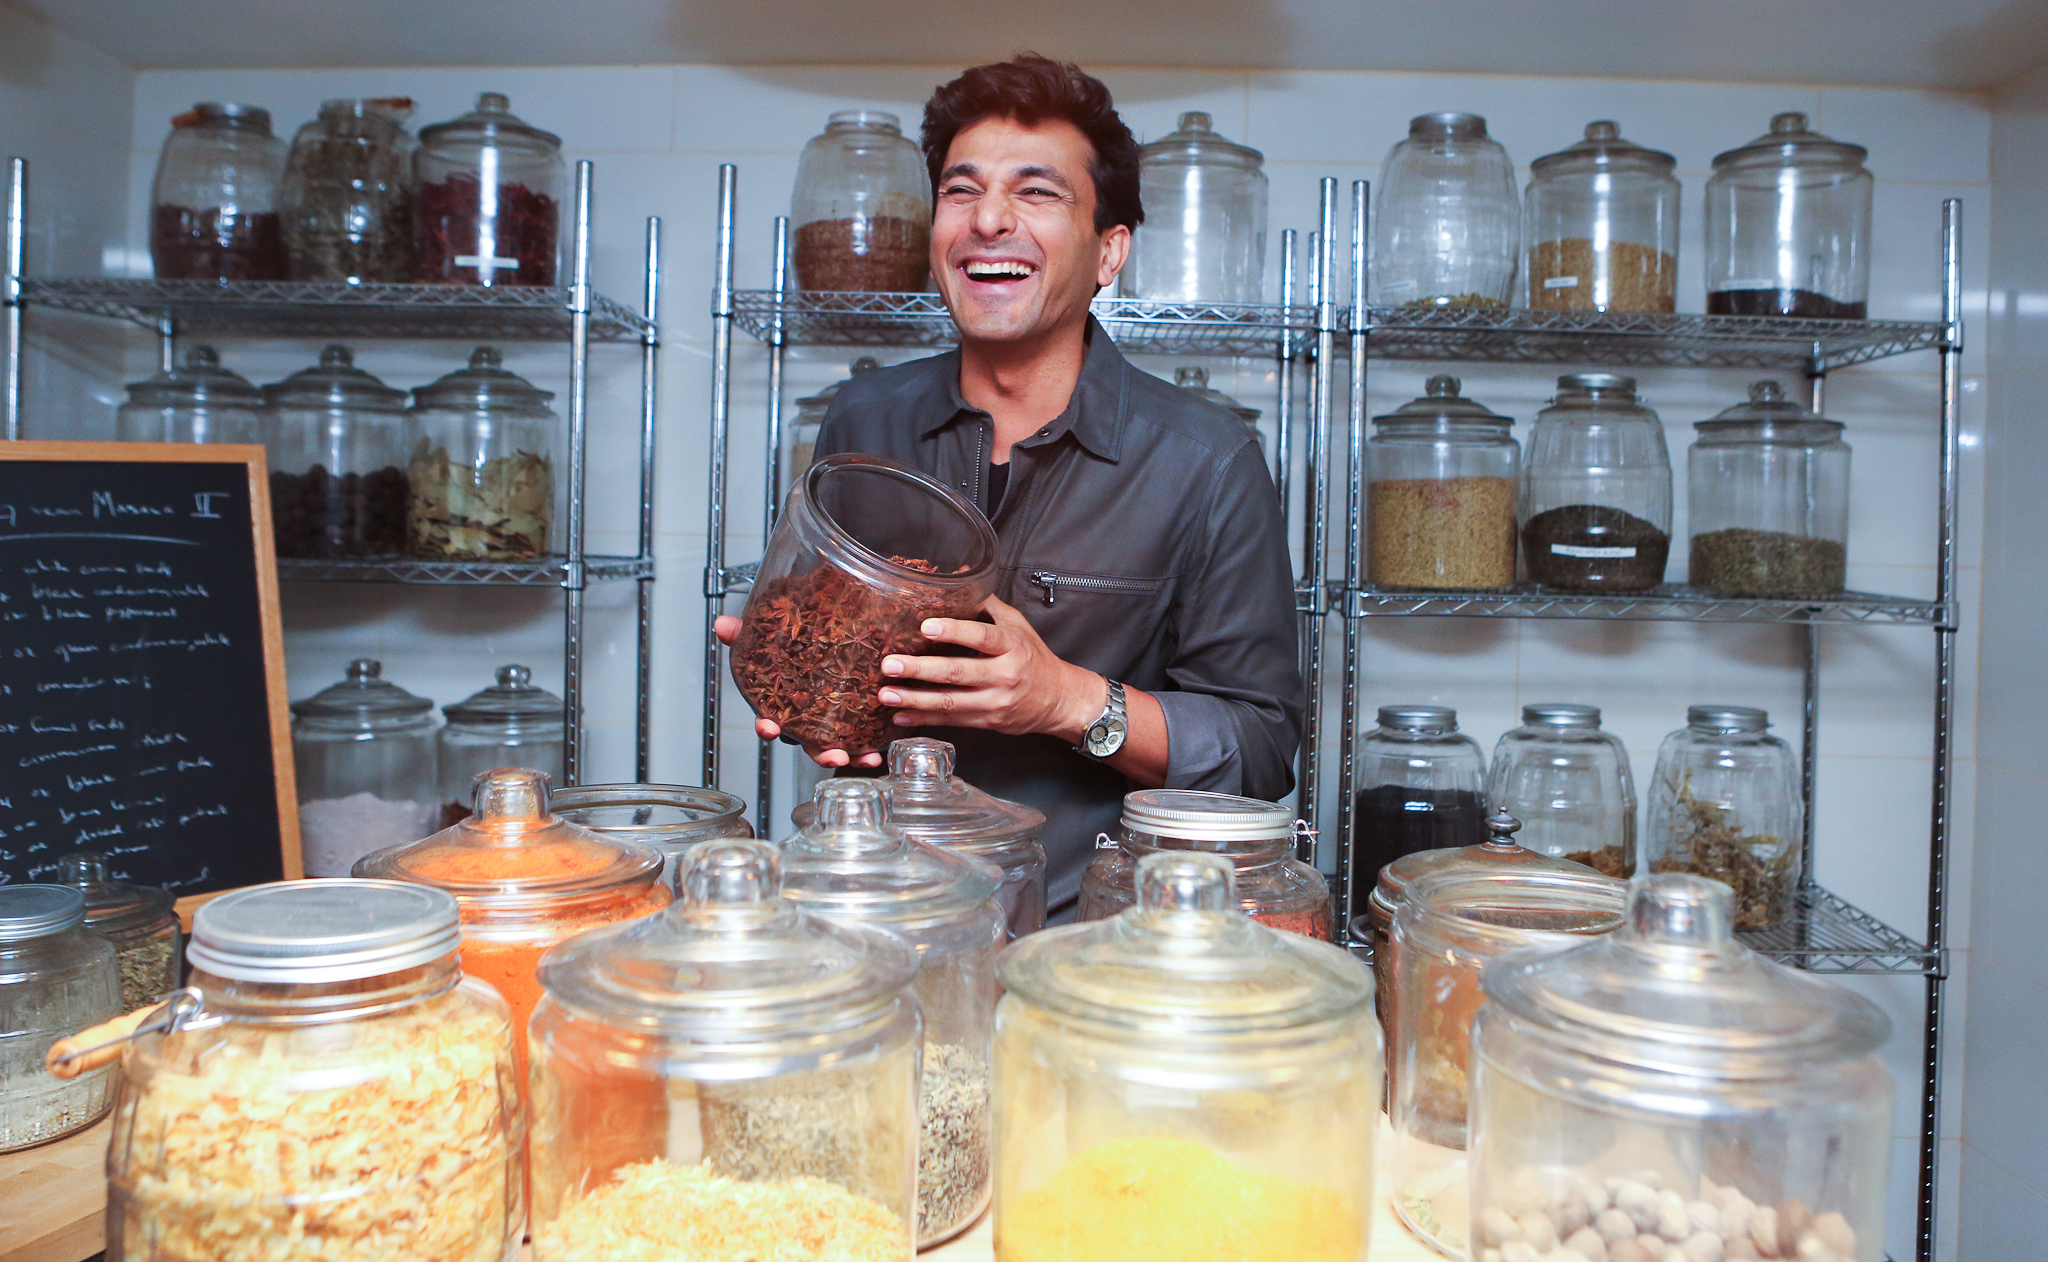 Vikas in the spice room